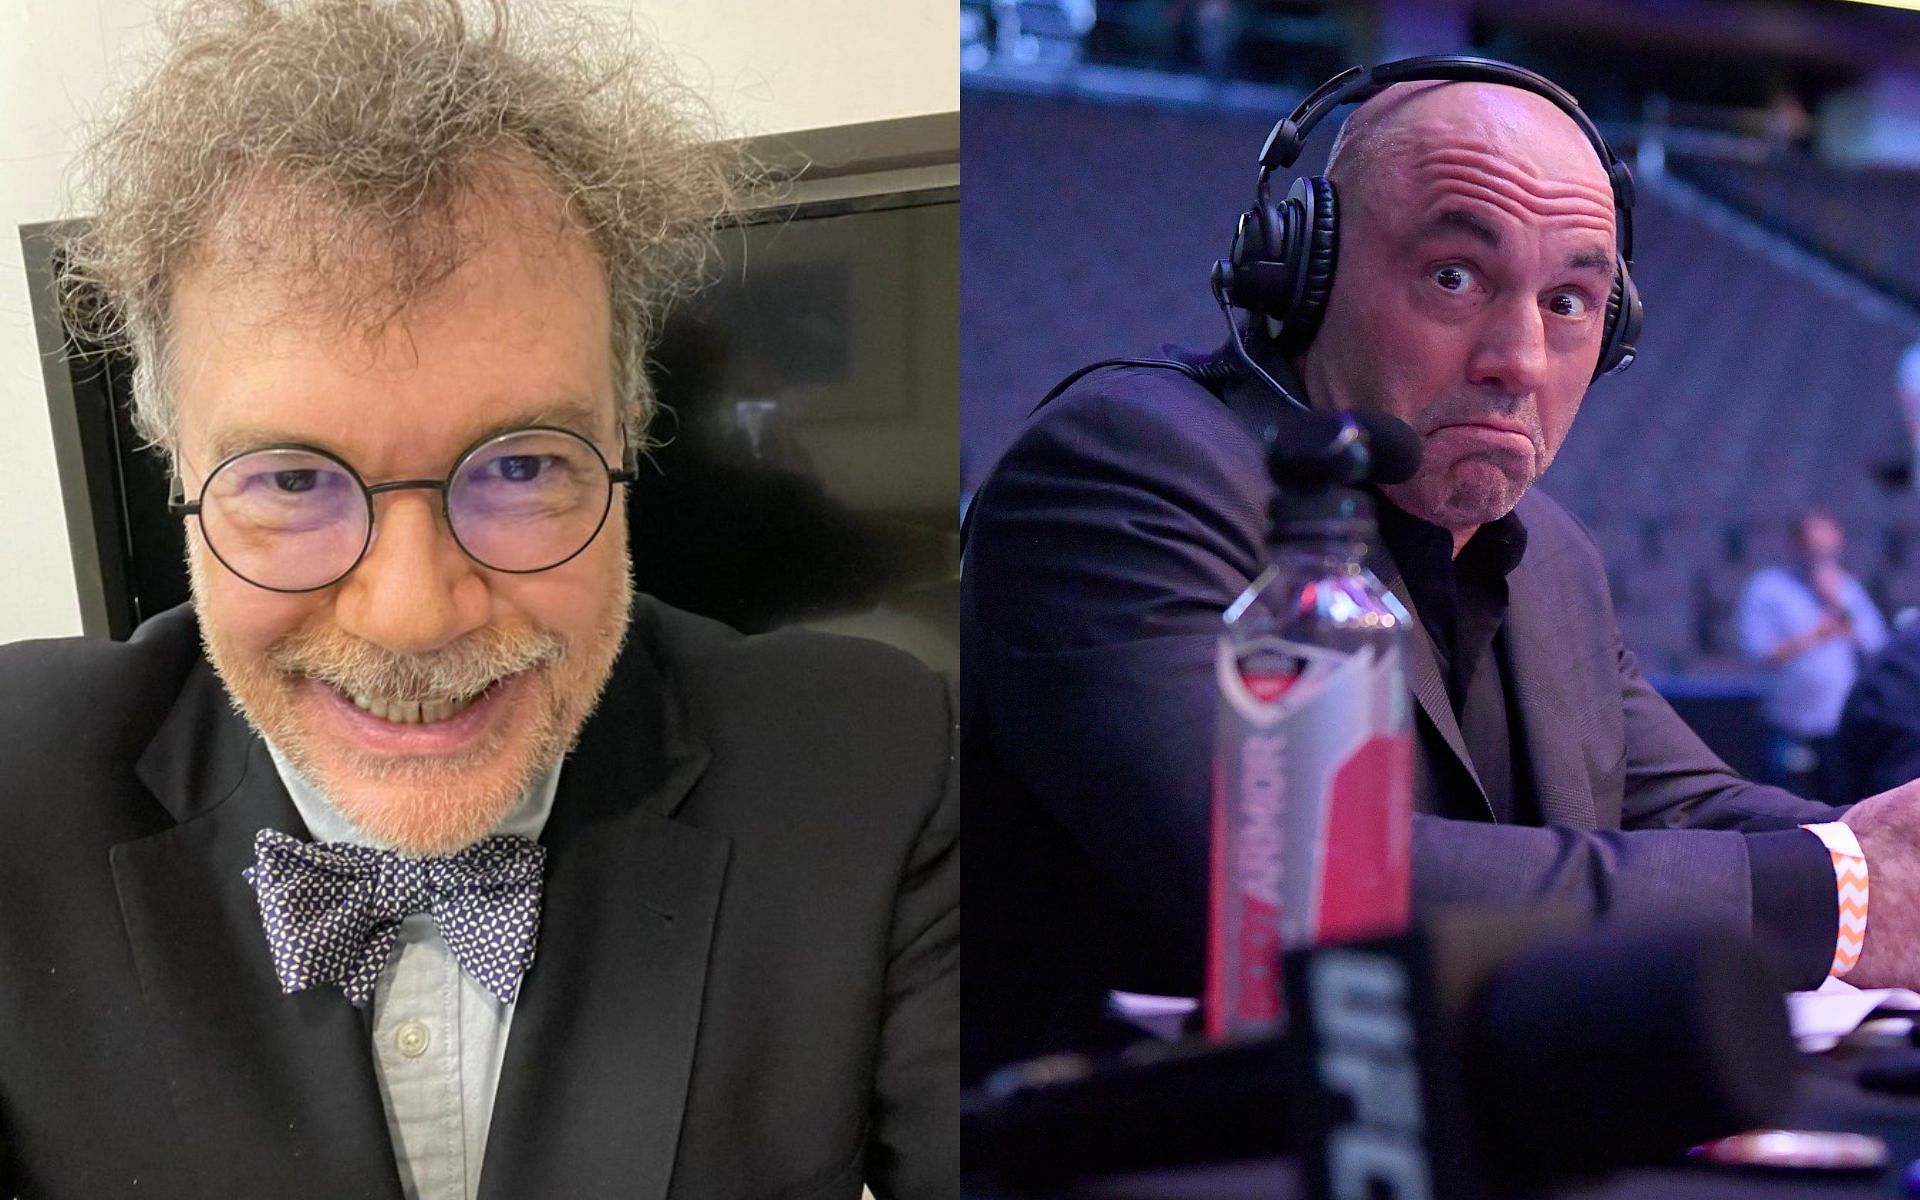 Peter Hotez (left) and Joe Rogan (right) (Image credits Getty Images and @PeterHotez on Twitter)